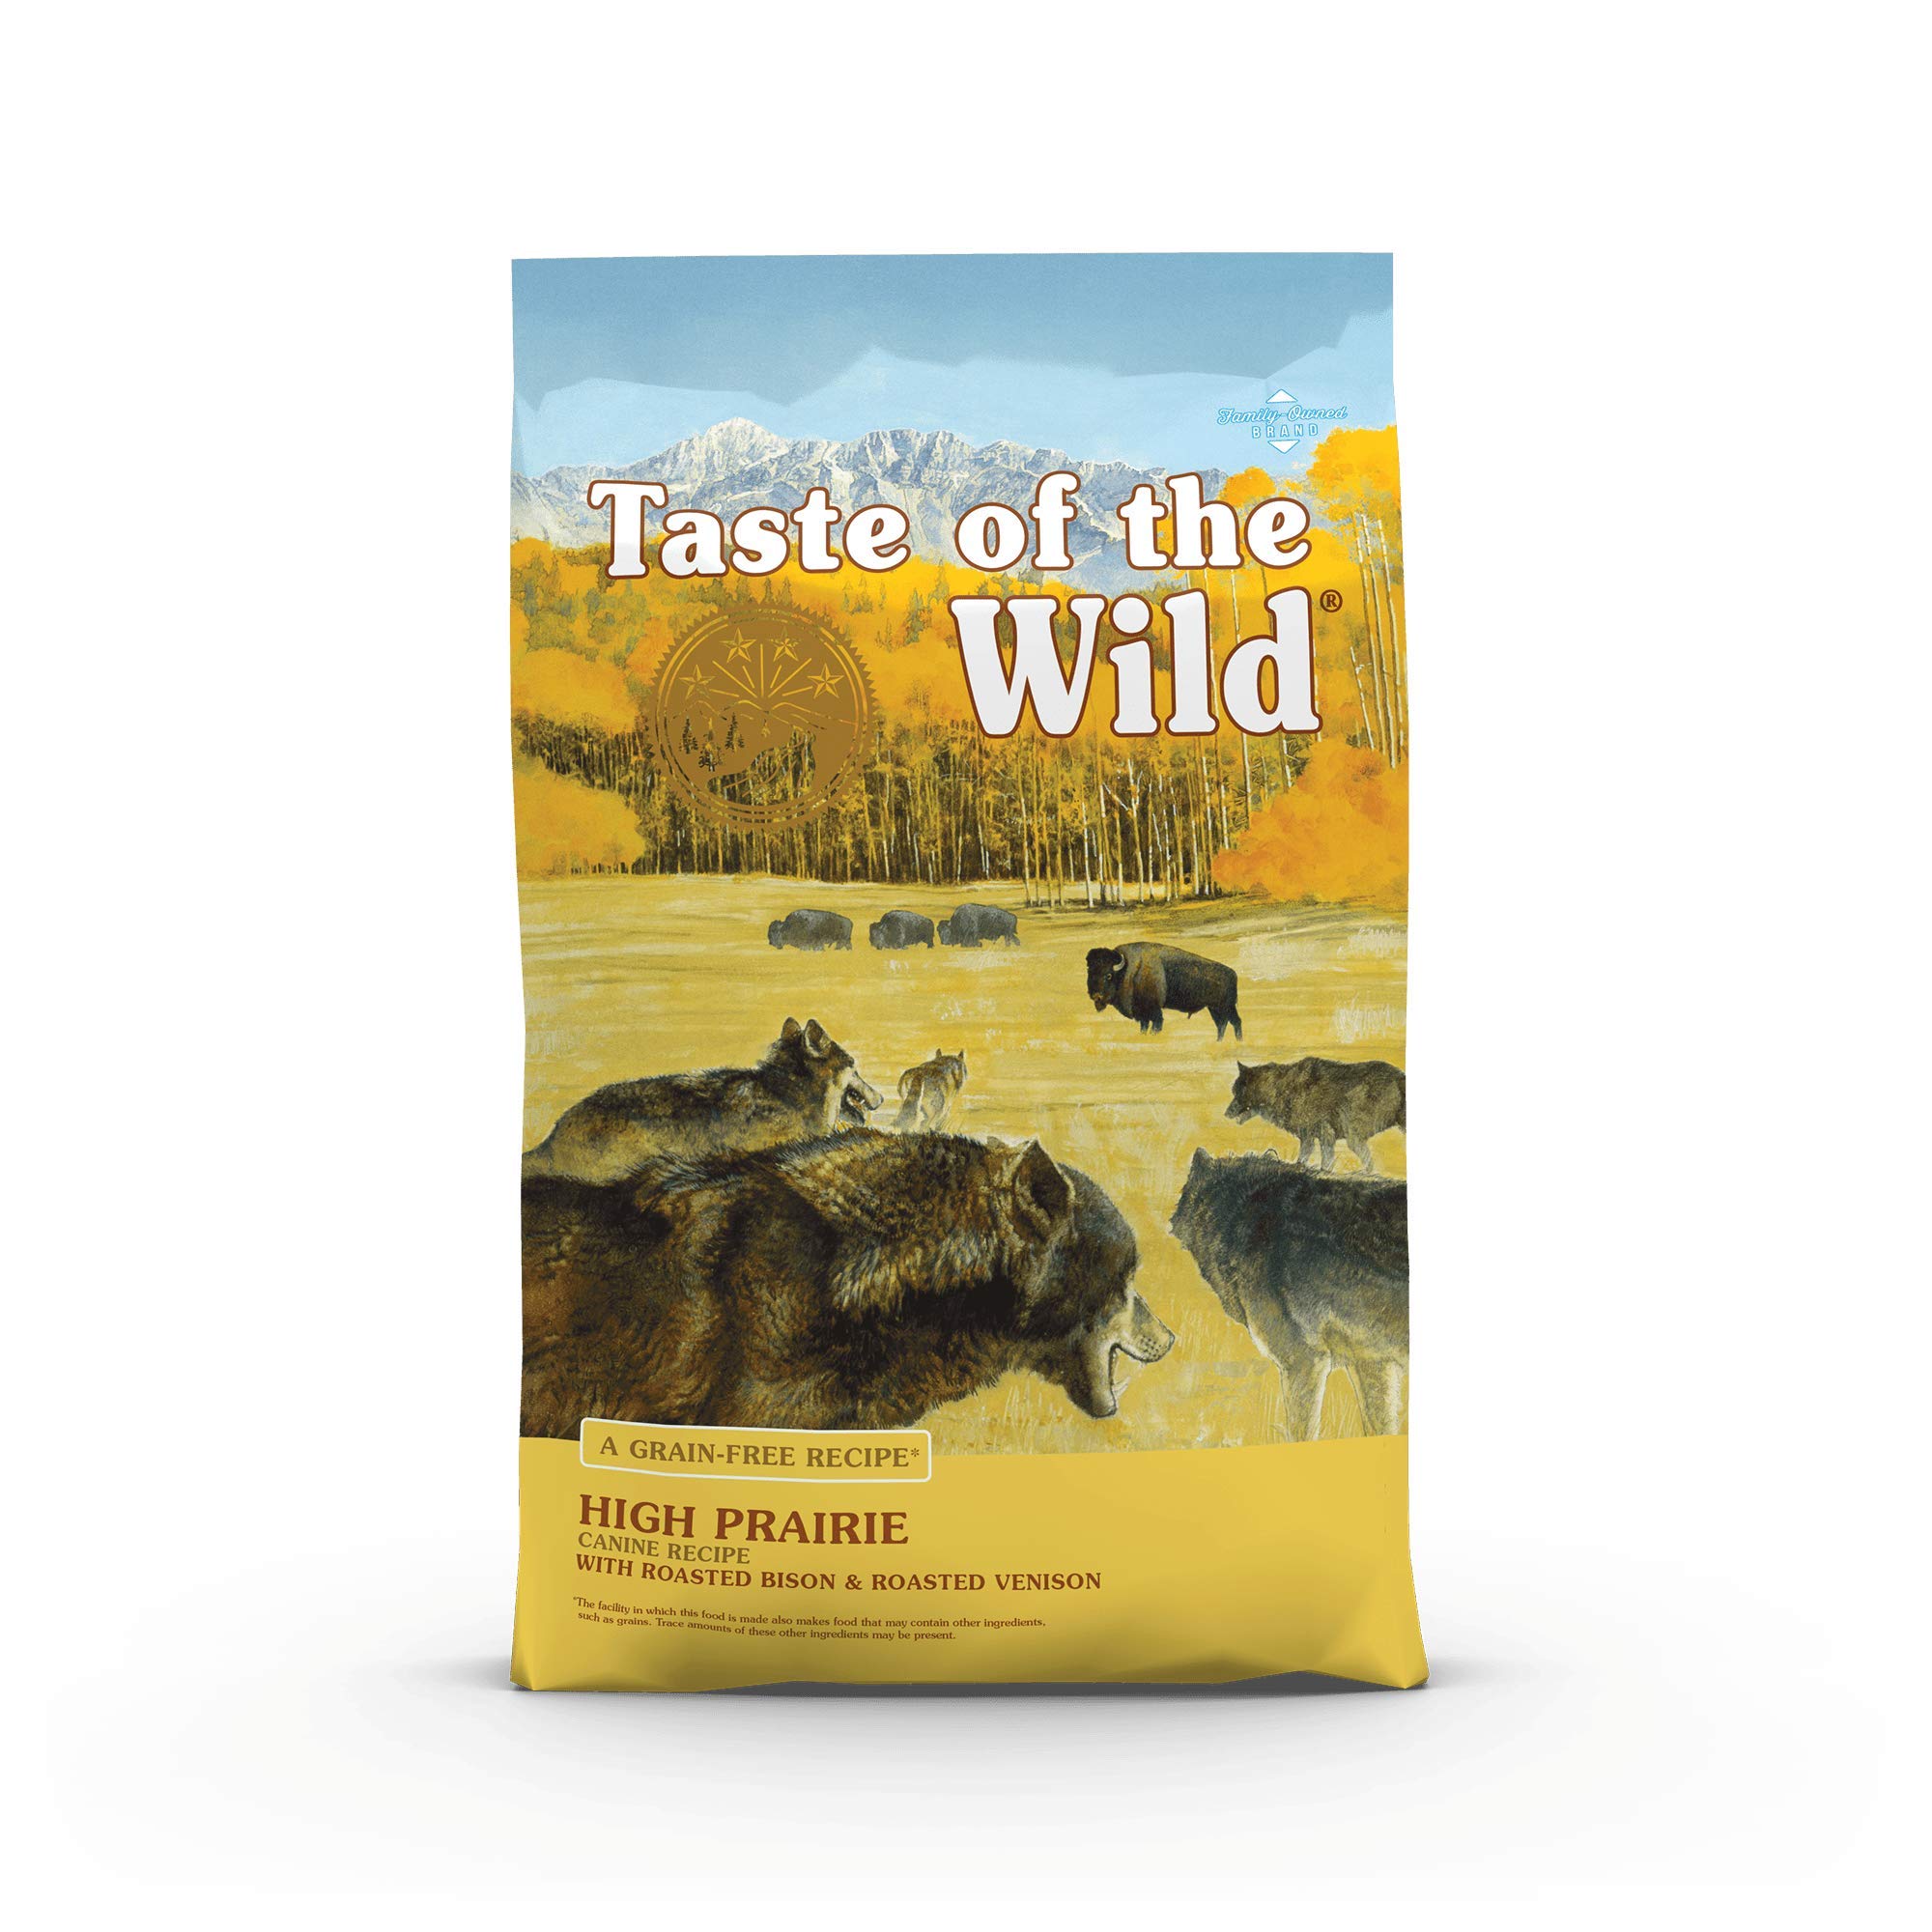 TOTW Dog Food 50% Off: 28-Lbs Taste of the Wild High Prairie Canine Grain-Free Recipe w/ Roasted Bison and Venison Adult Dry Dog Food $26.55 w/ S&S + Free S&H w/ Prime or on $35+